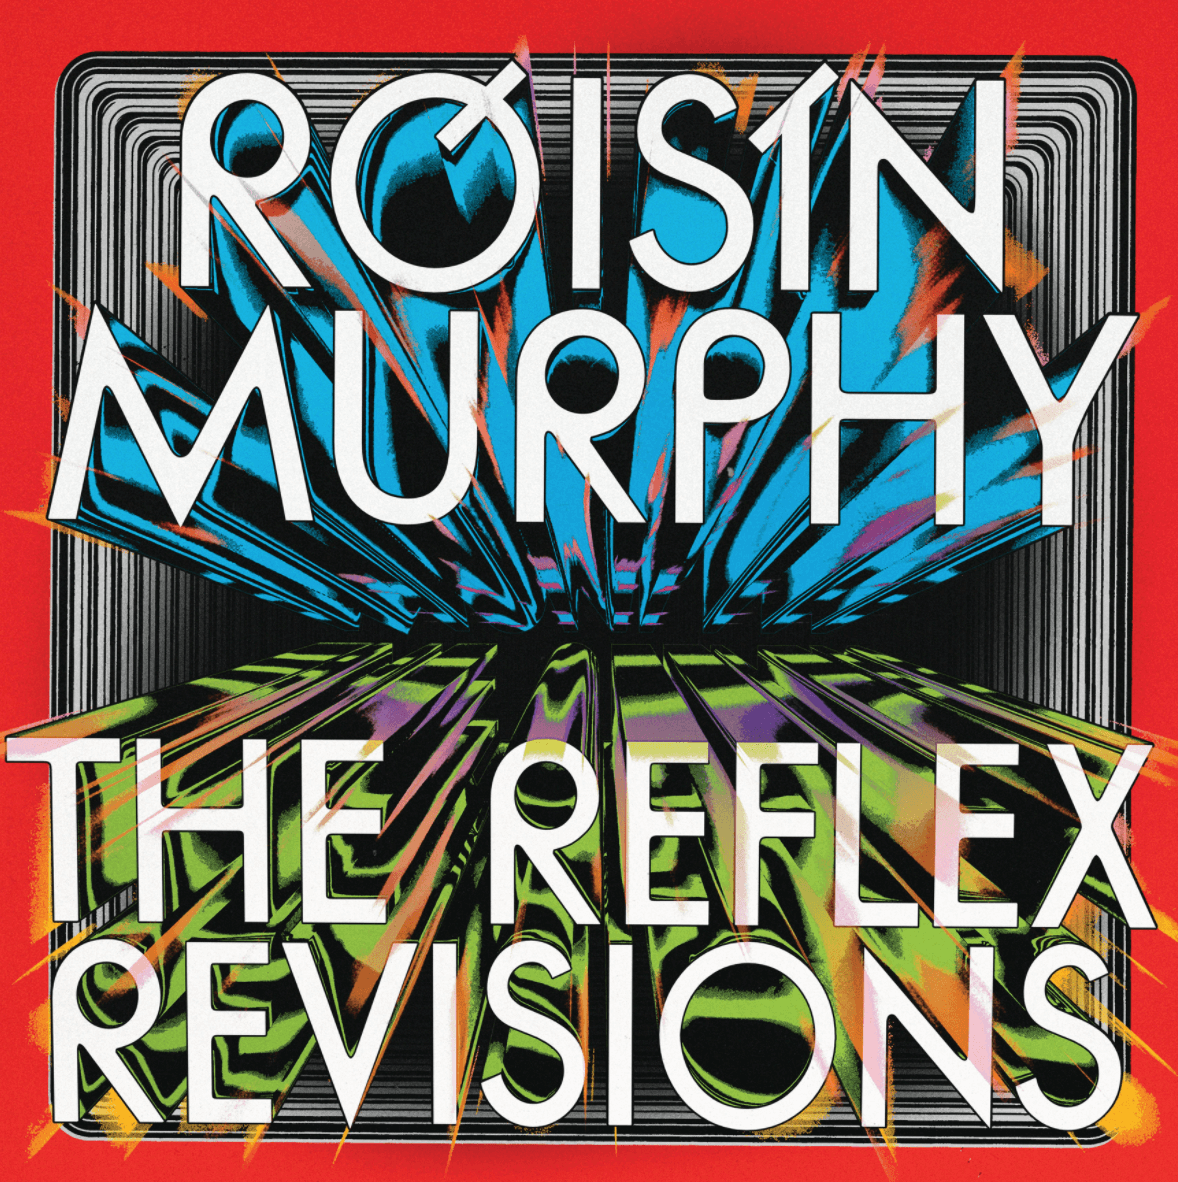 Róisín Murphy has released two new remixes by producer and remixer The Reflex